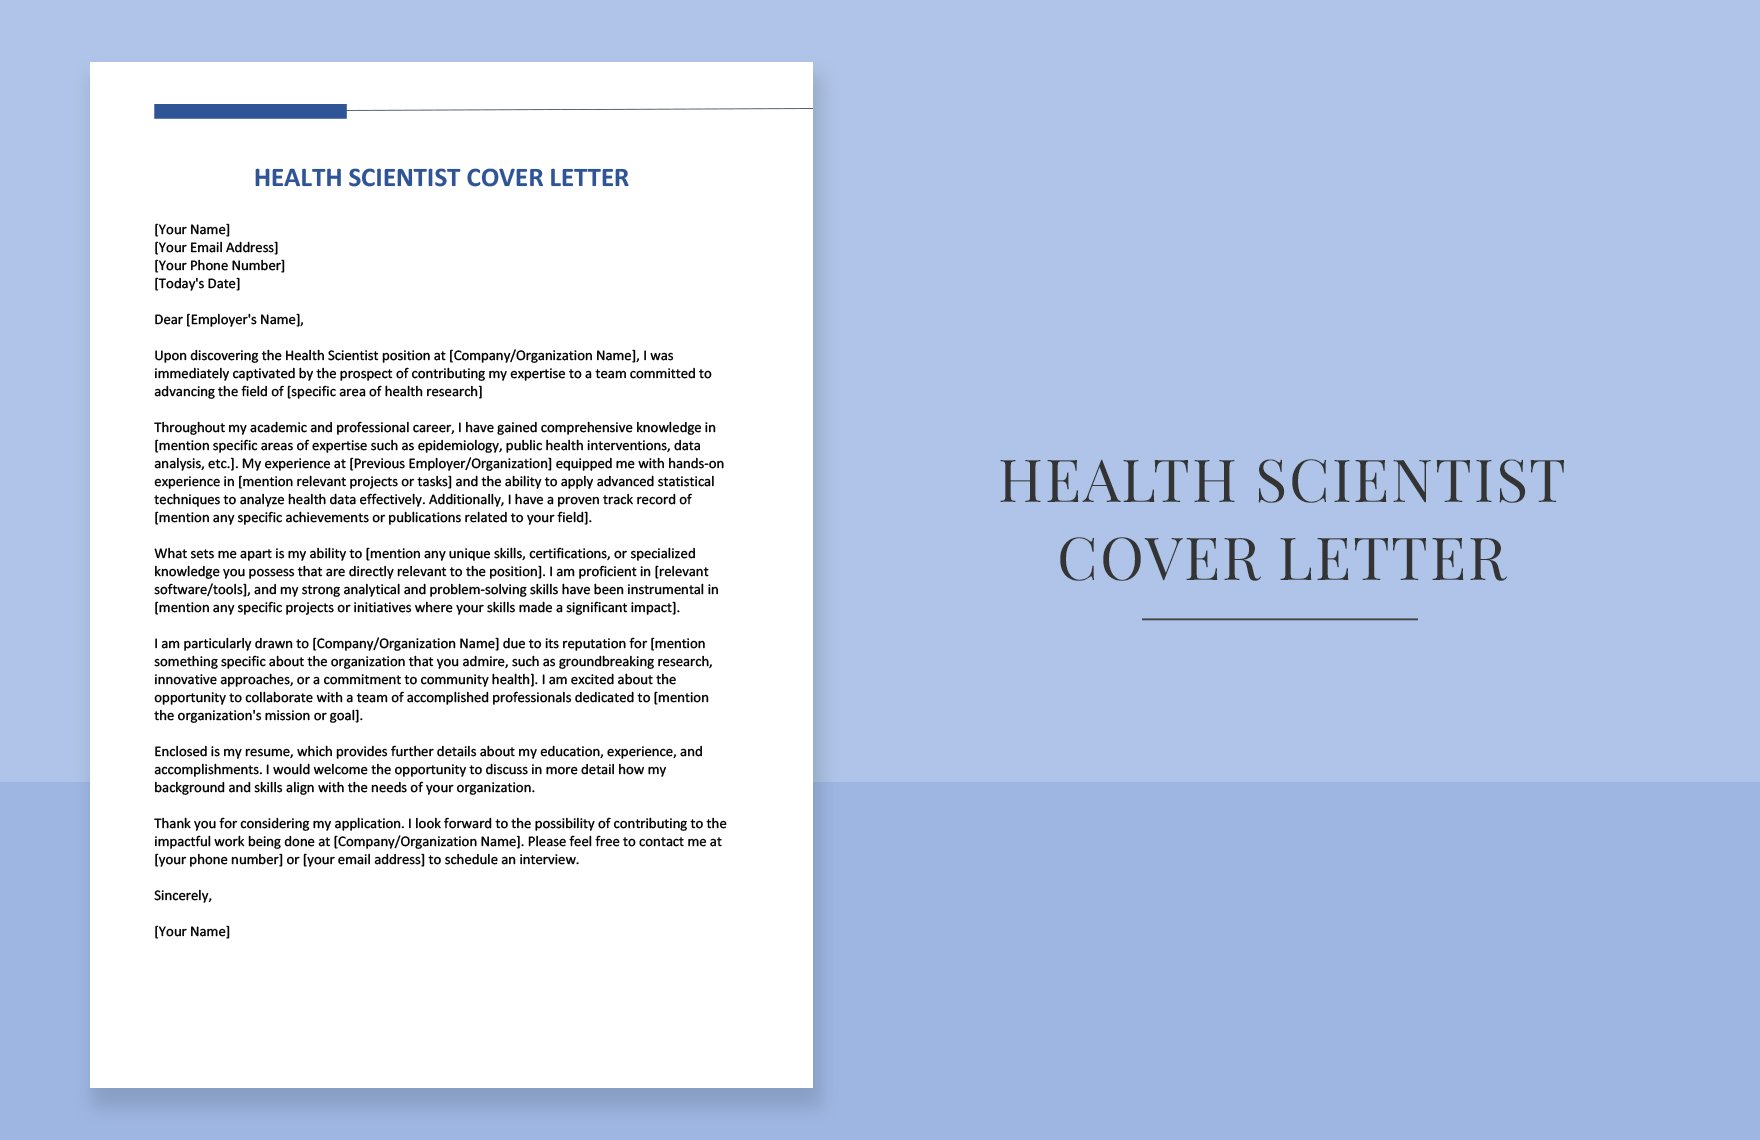 Health Scientist Cover Letter